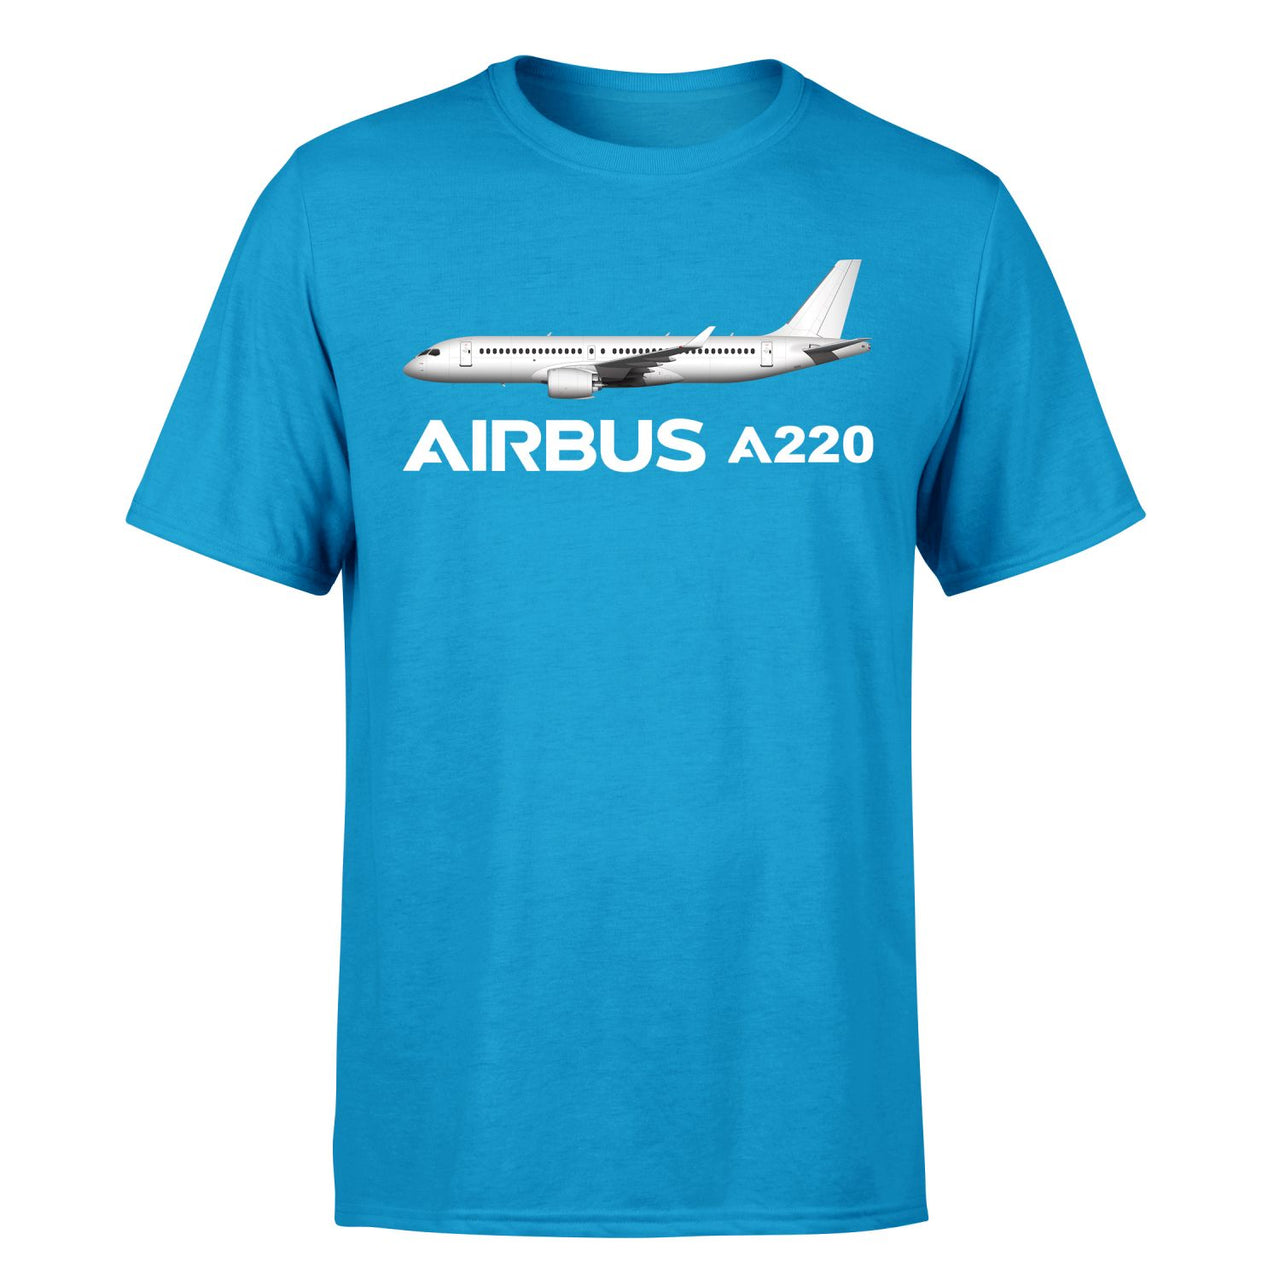 The Airbus A220 Designed T-Shirts